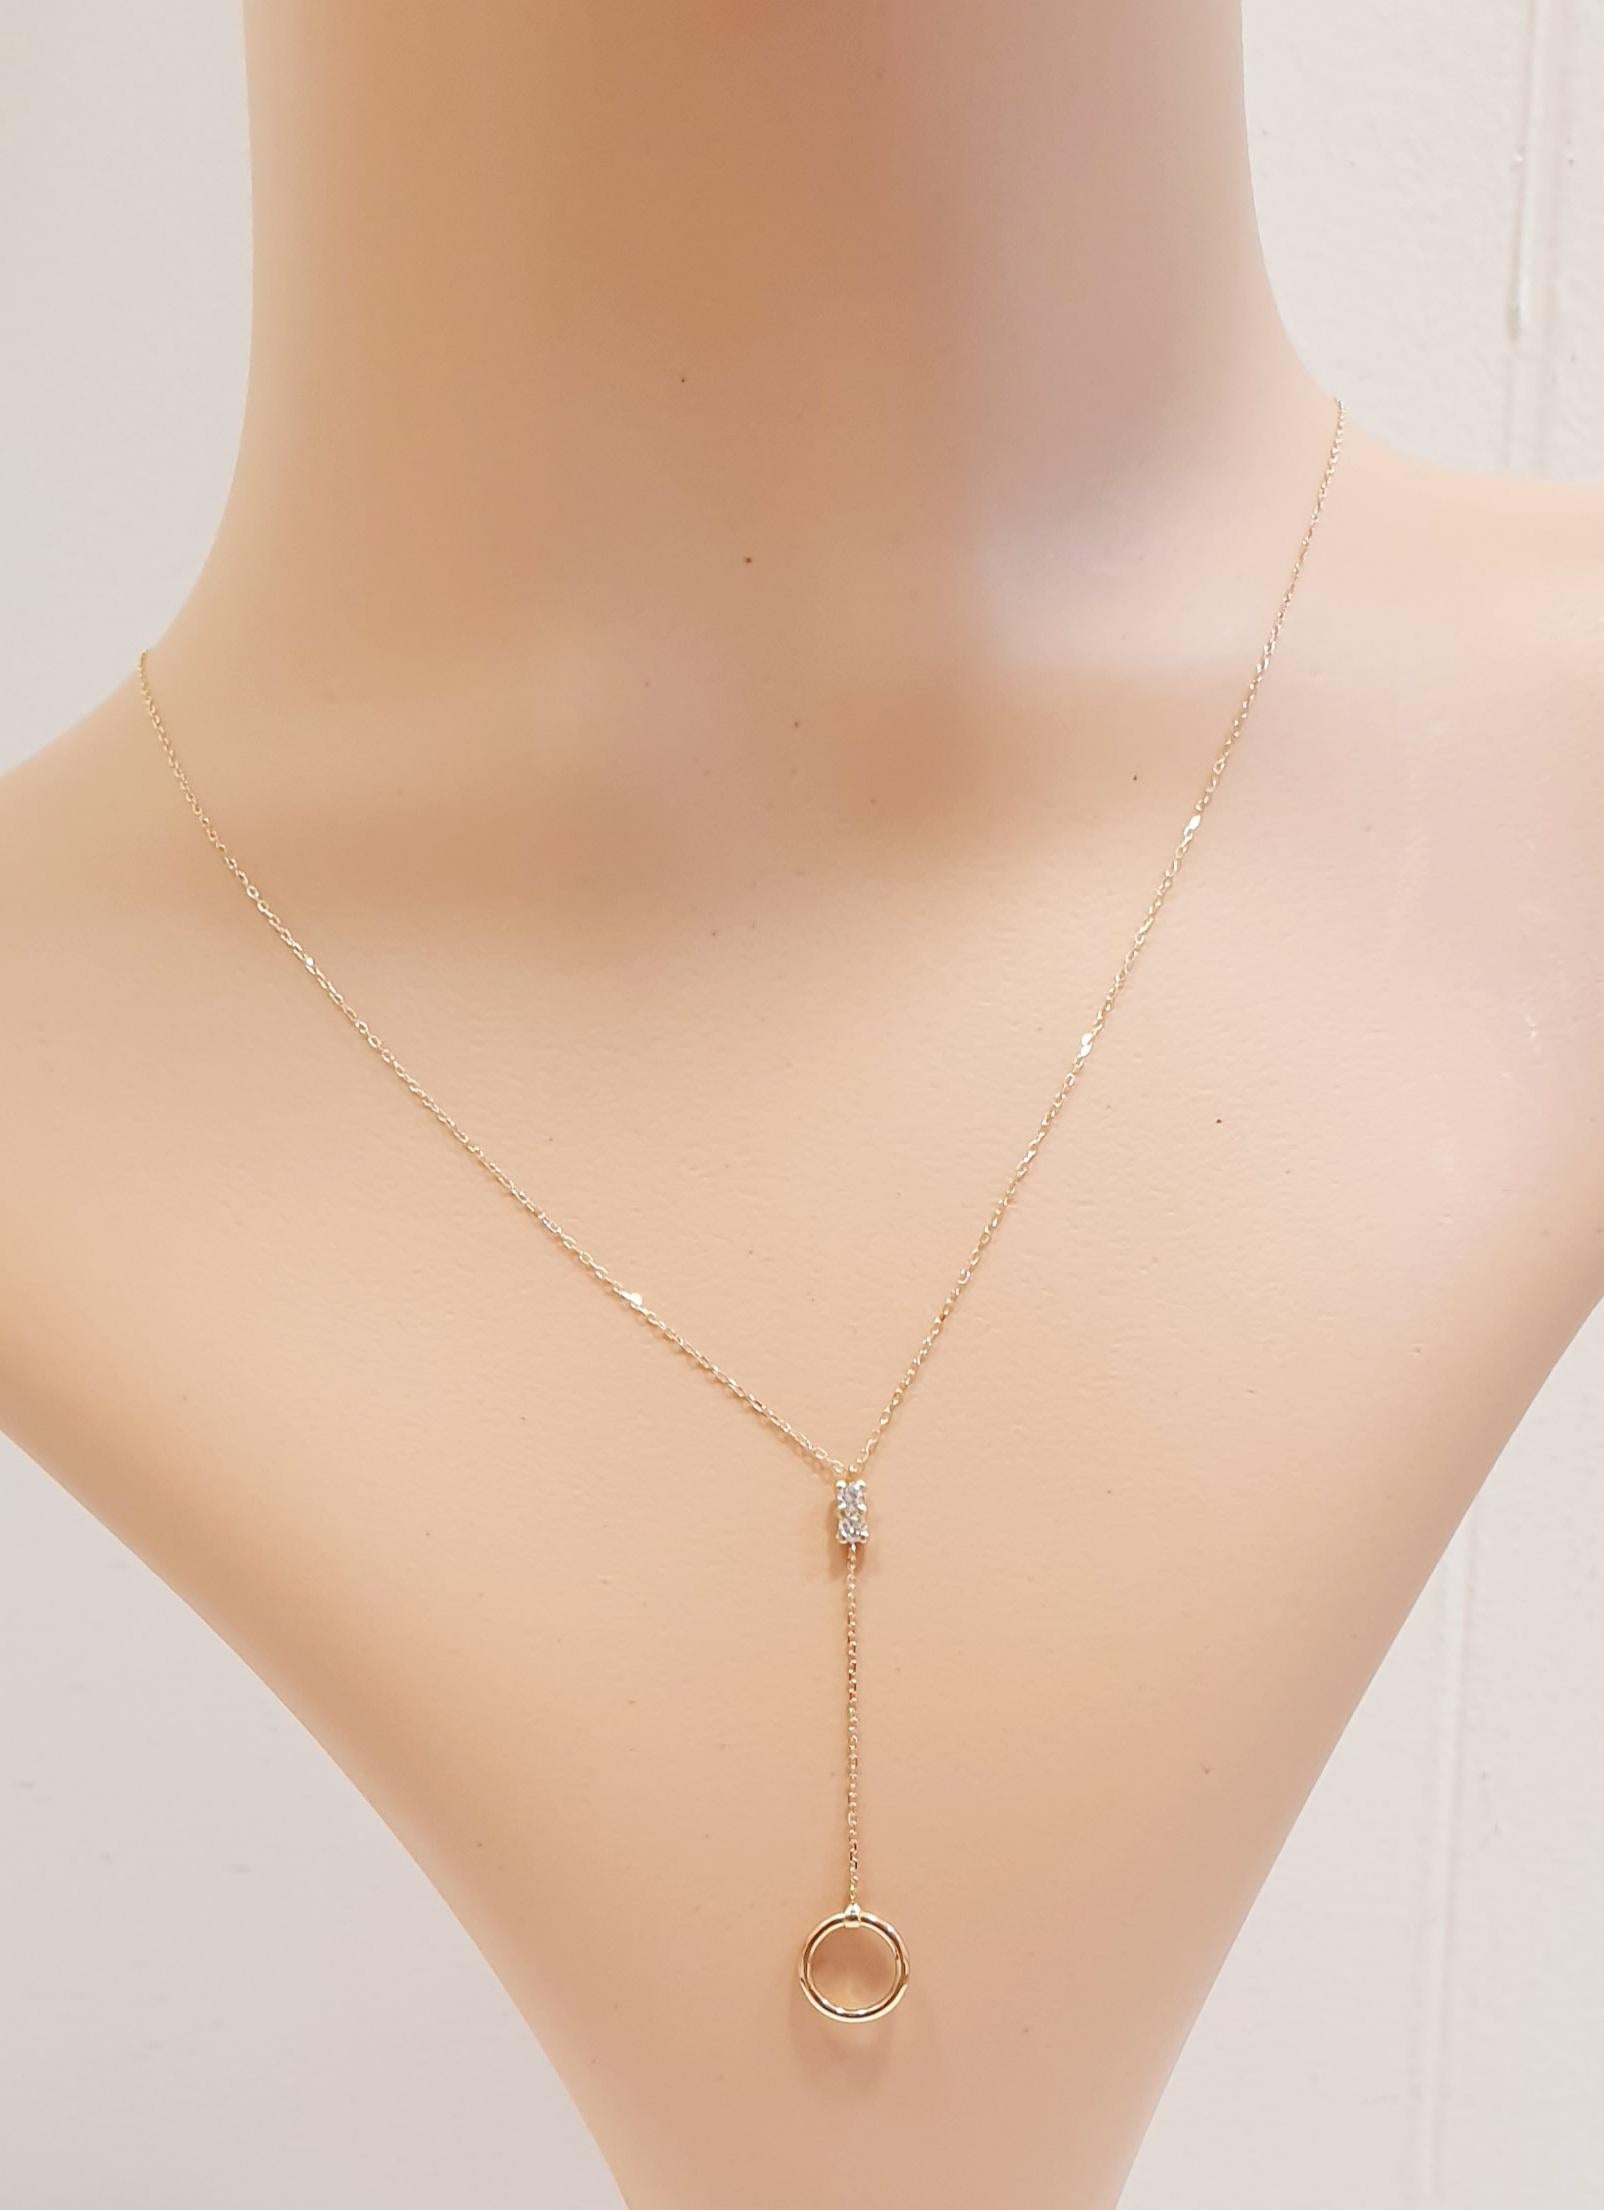 Brilliant Cut 18 Karat Yellow Gold Necklace with Gold Tie-Shaped Pendant and Diamonds For Sale